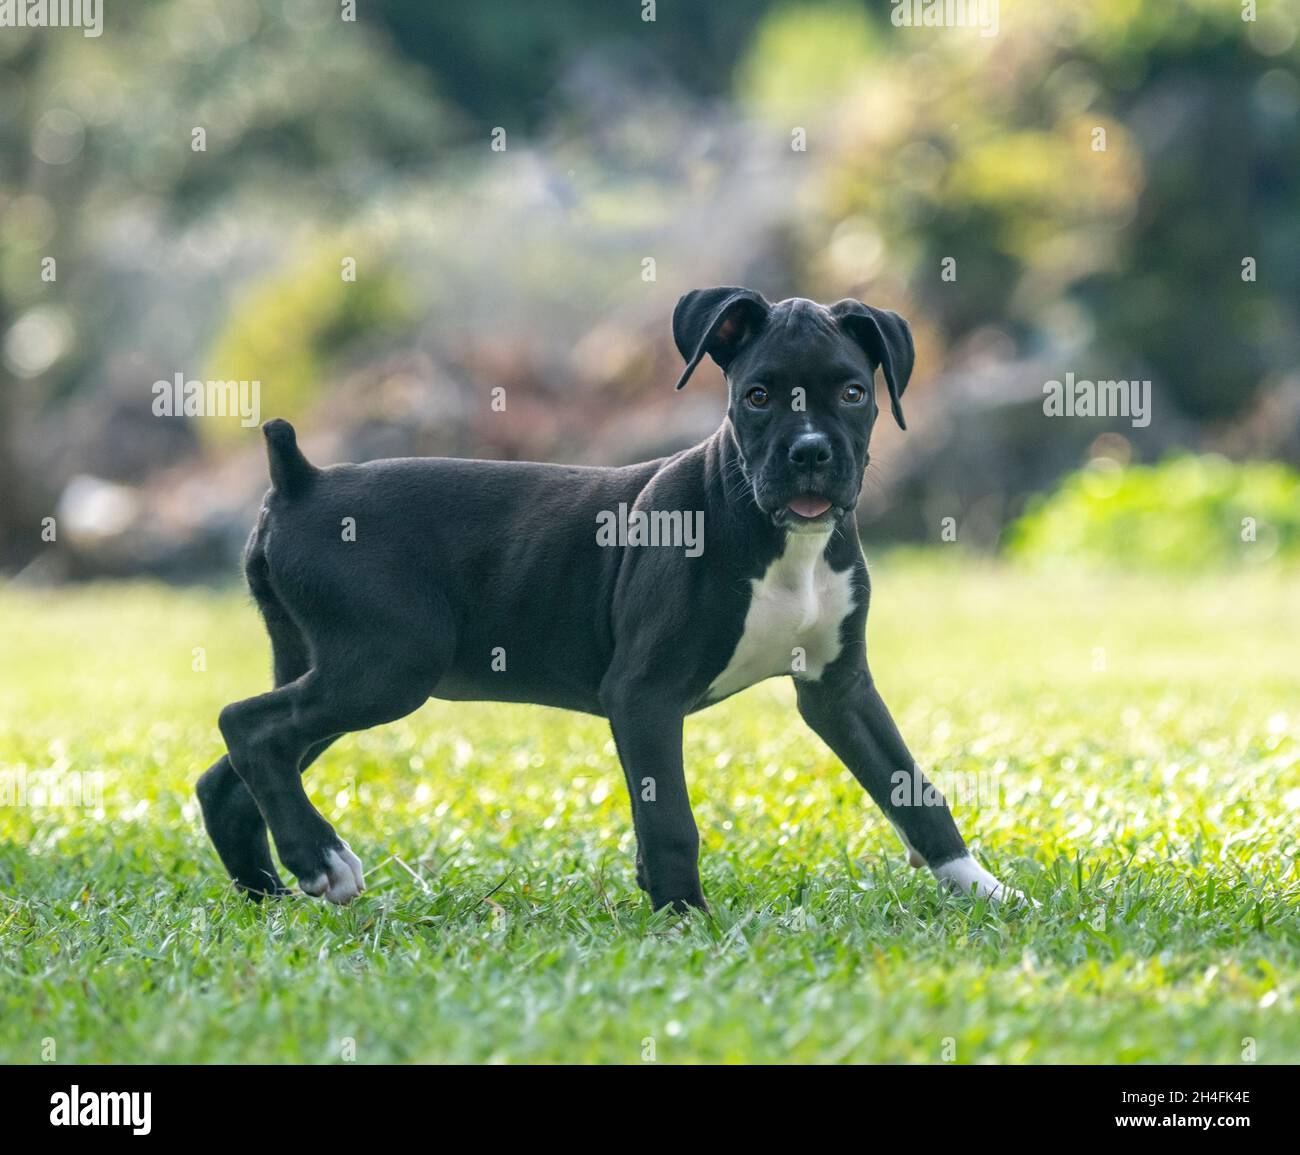 Alert 9 week old black Boxer dog puppy plays on grass lawn Stock Photo